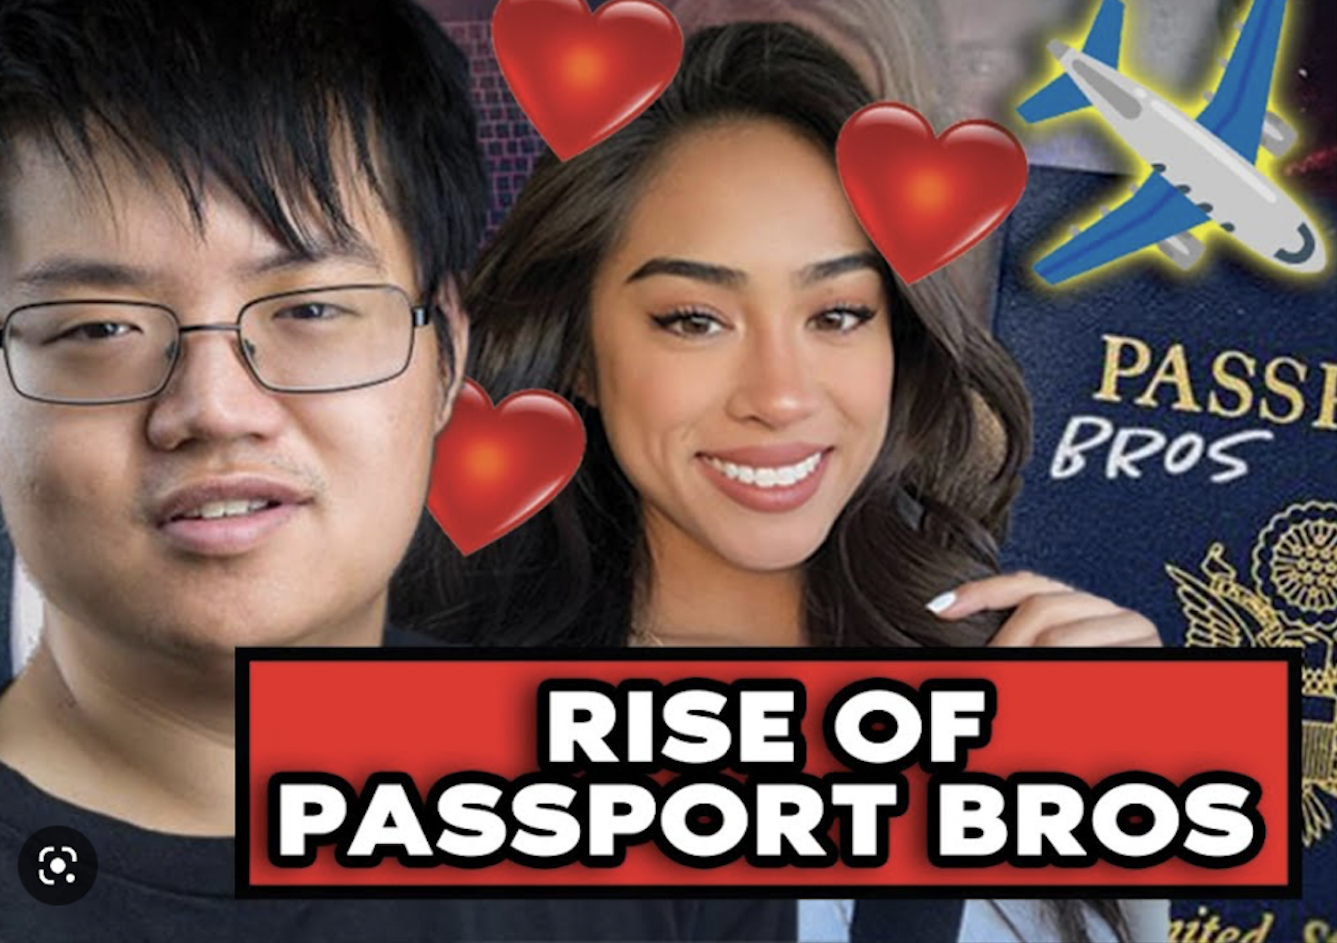 Man and woman with Title "Rise Of Passport Bros"